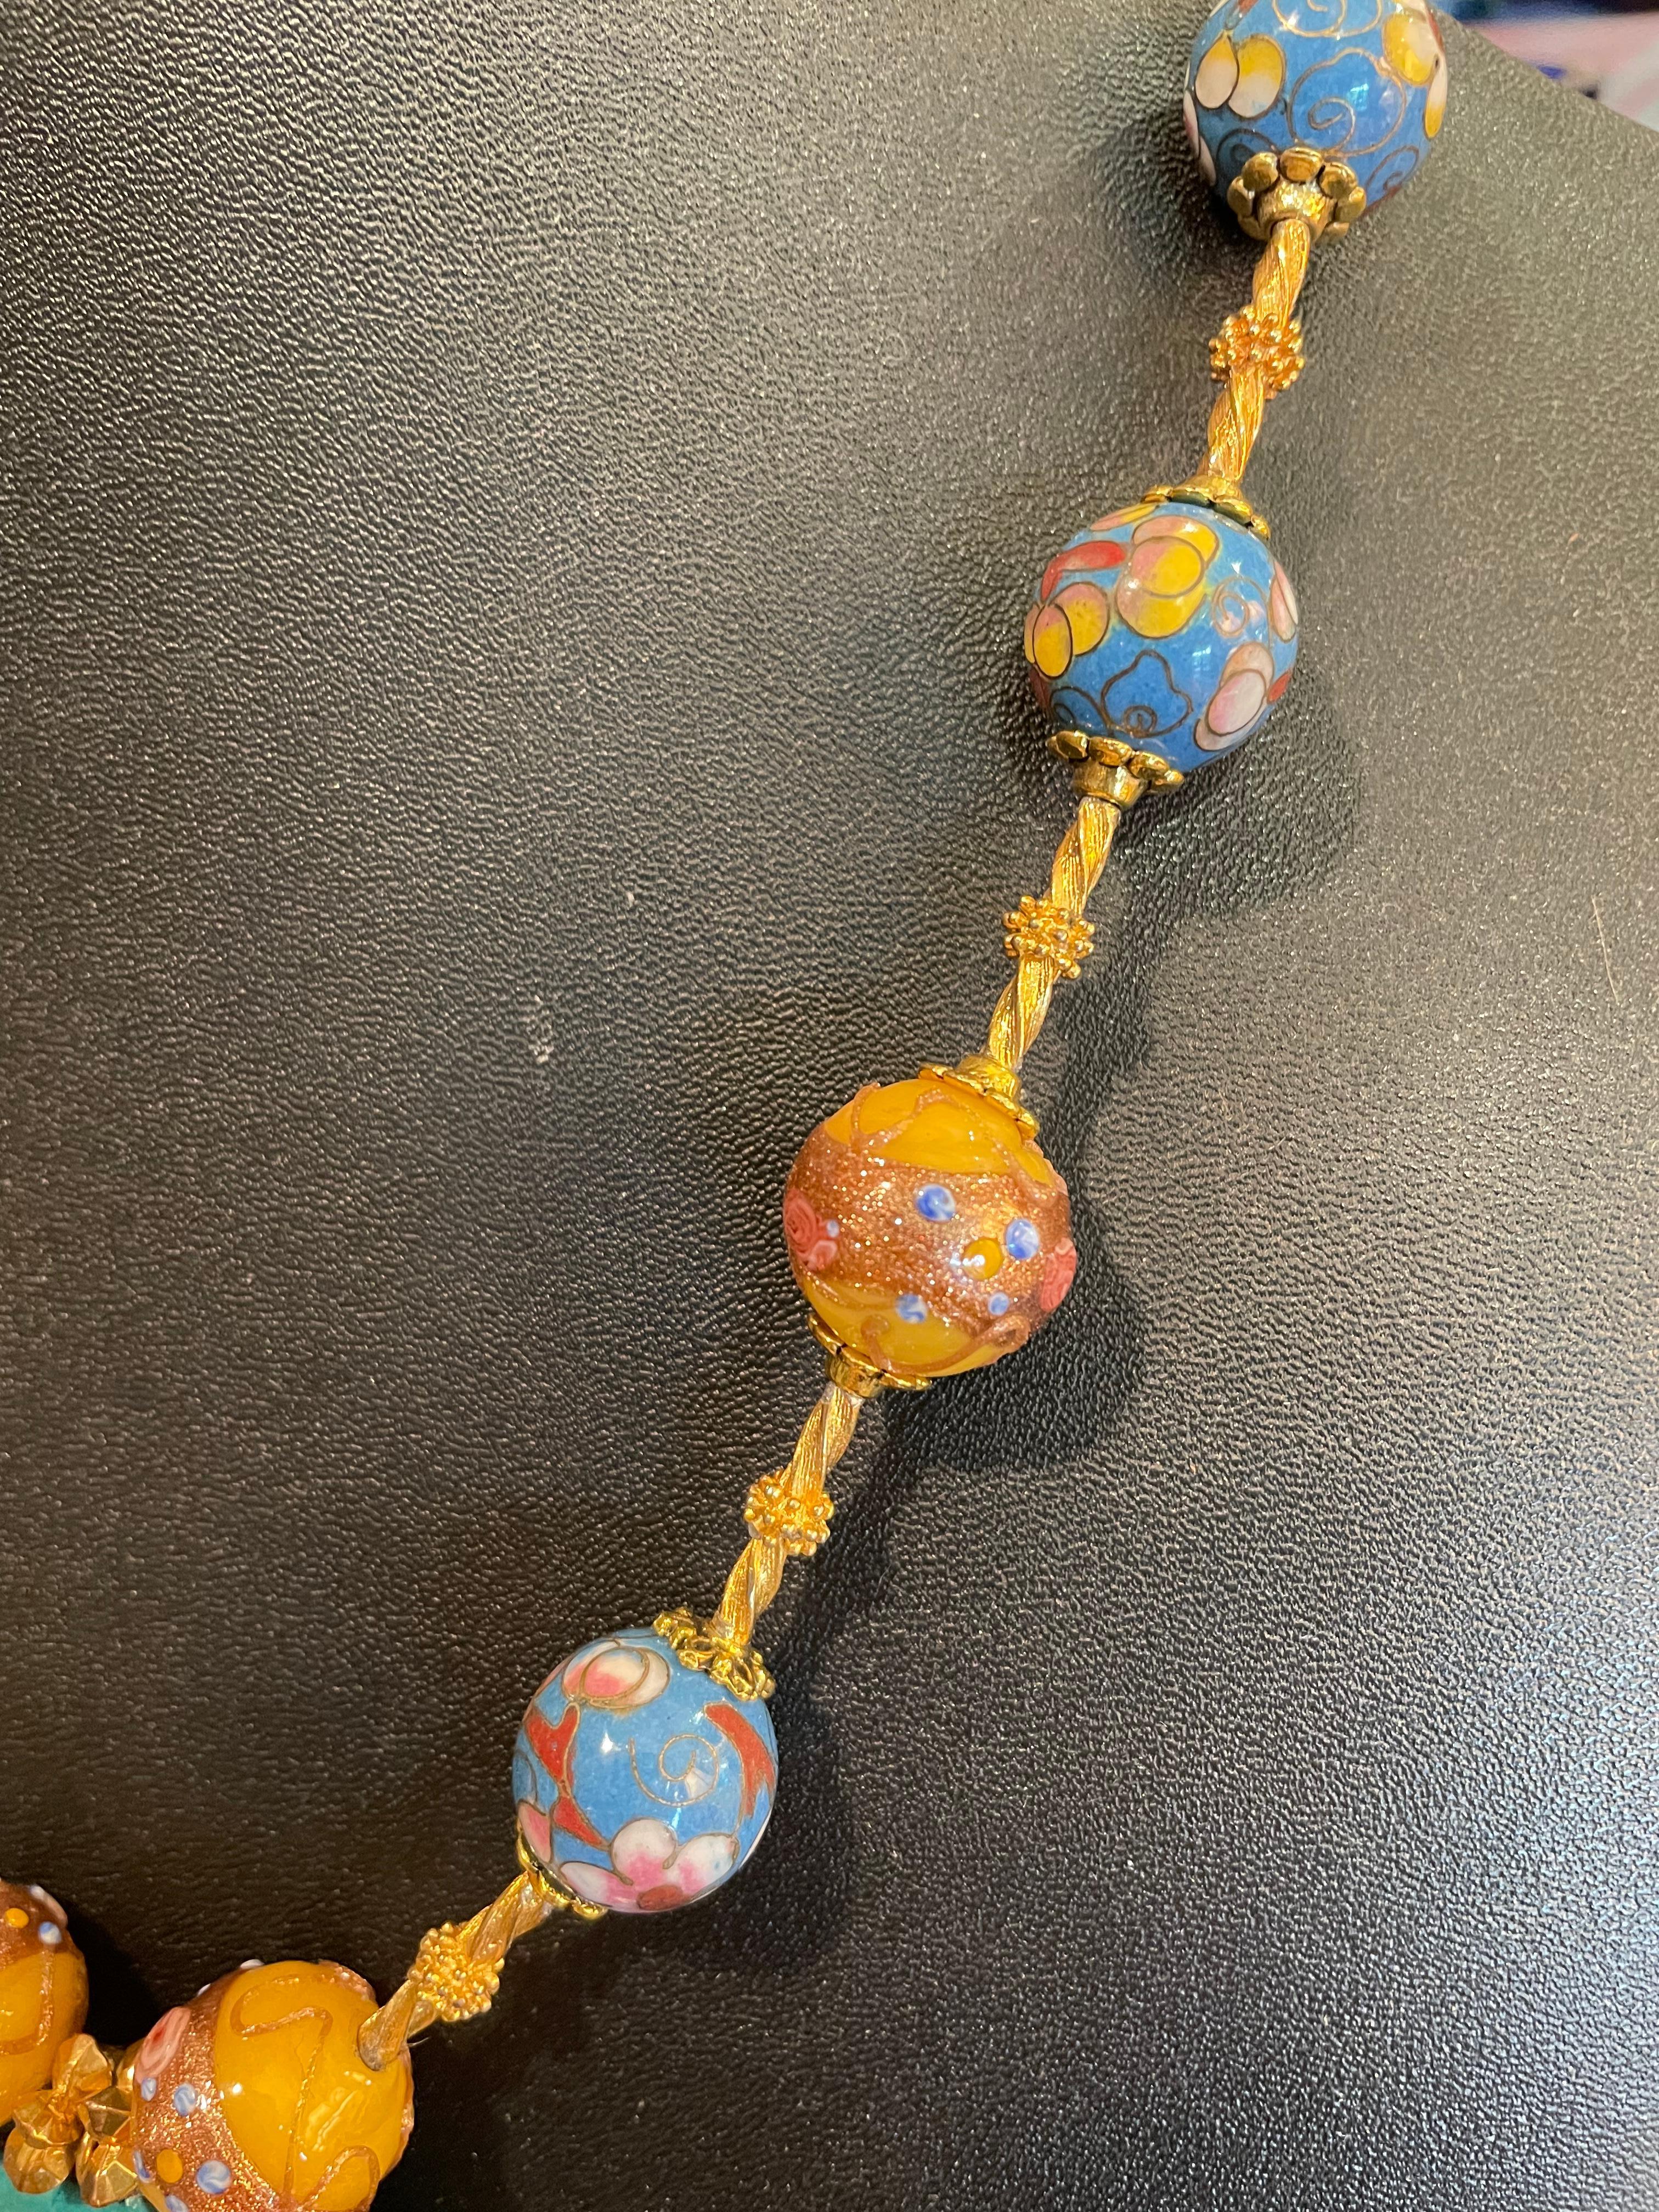 Lorraine’s Bijoux offers a vintage, multicolored , cloisonné heart necklace accompanied by Vintage,Venetian glass Wedding cake handmade beads. This heart was found in an antique shop in Western Michigan and was struck by its’ beauty and